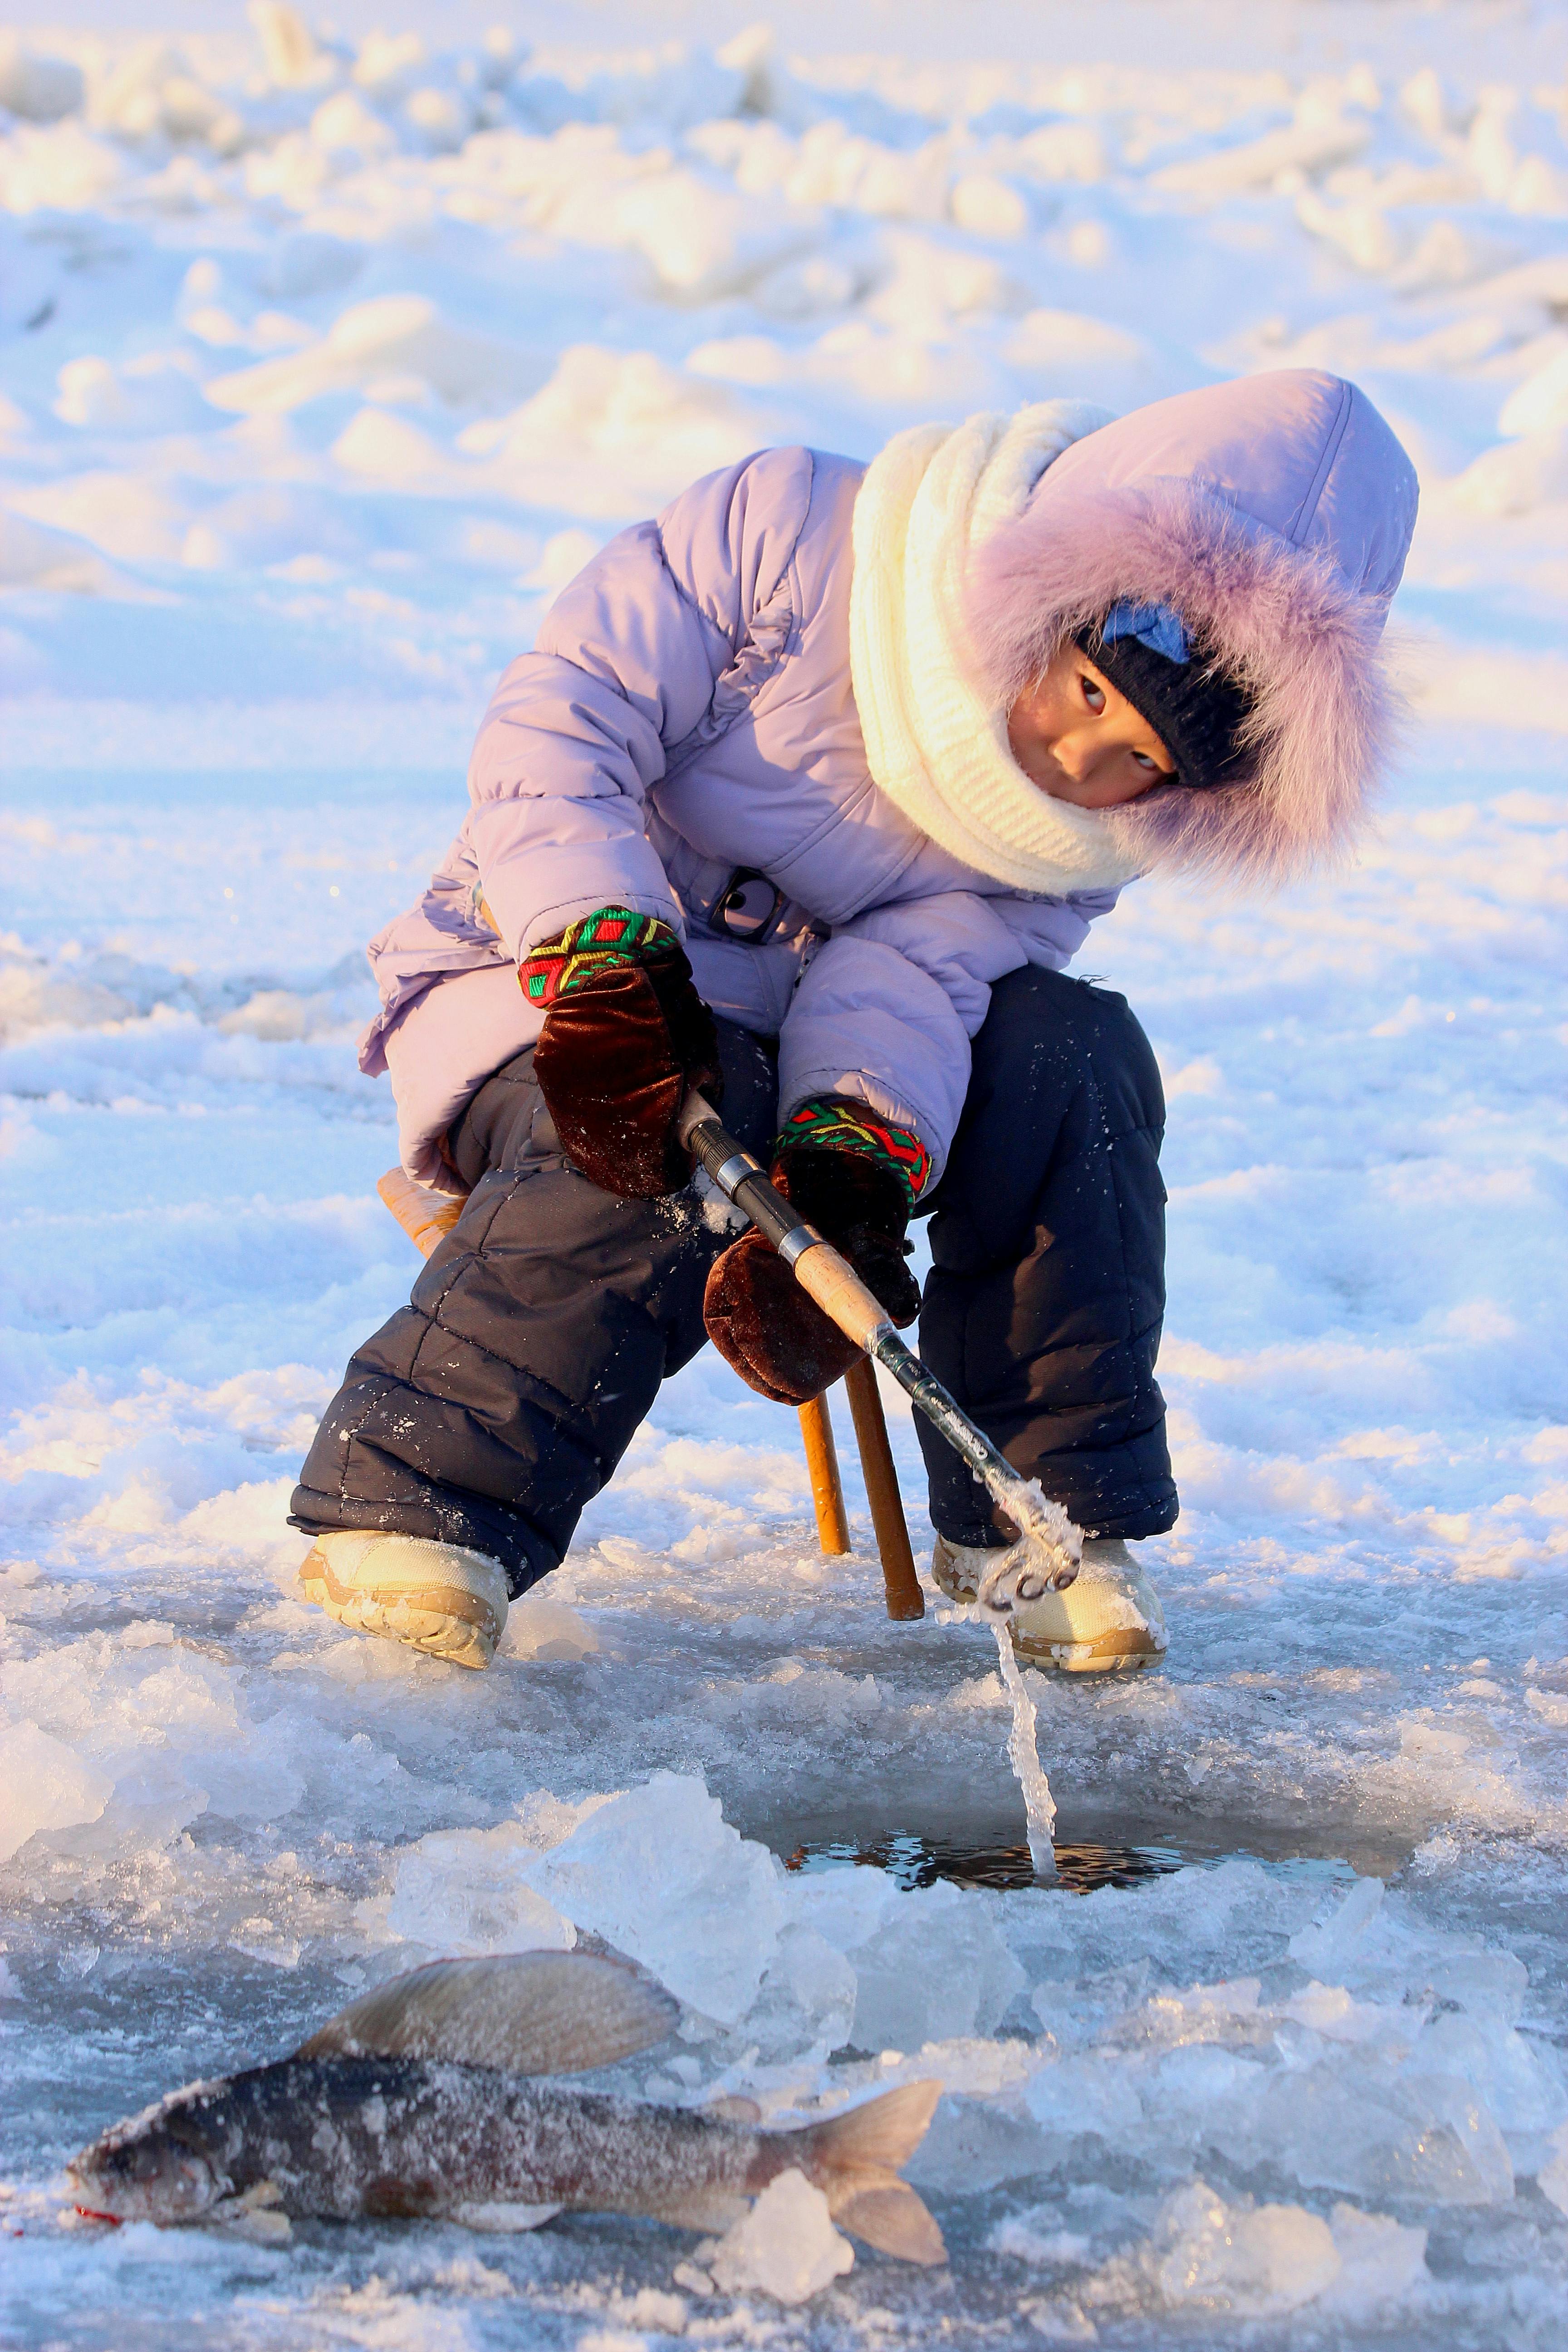 Ice Fishing Equipment Stock Photo, Picture and Royalty Free Image. Image  35795586.